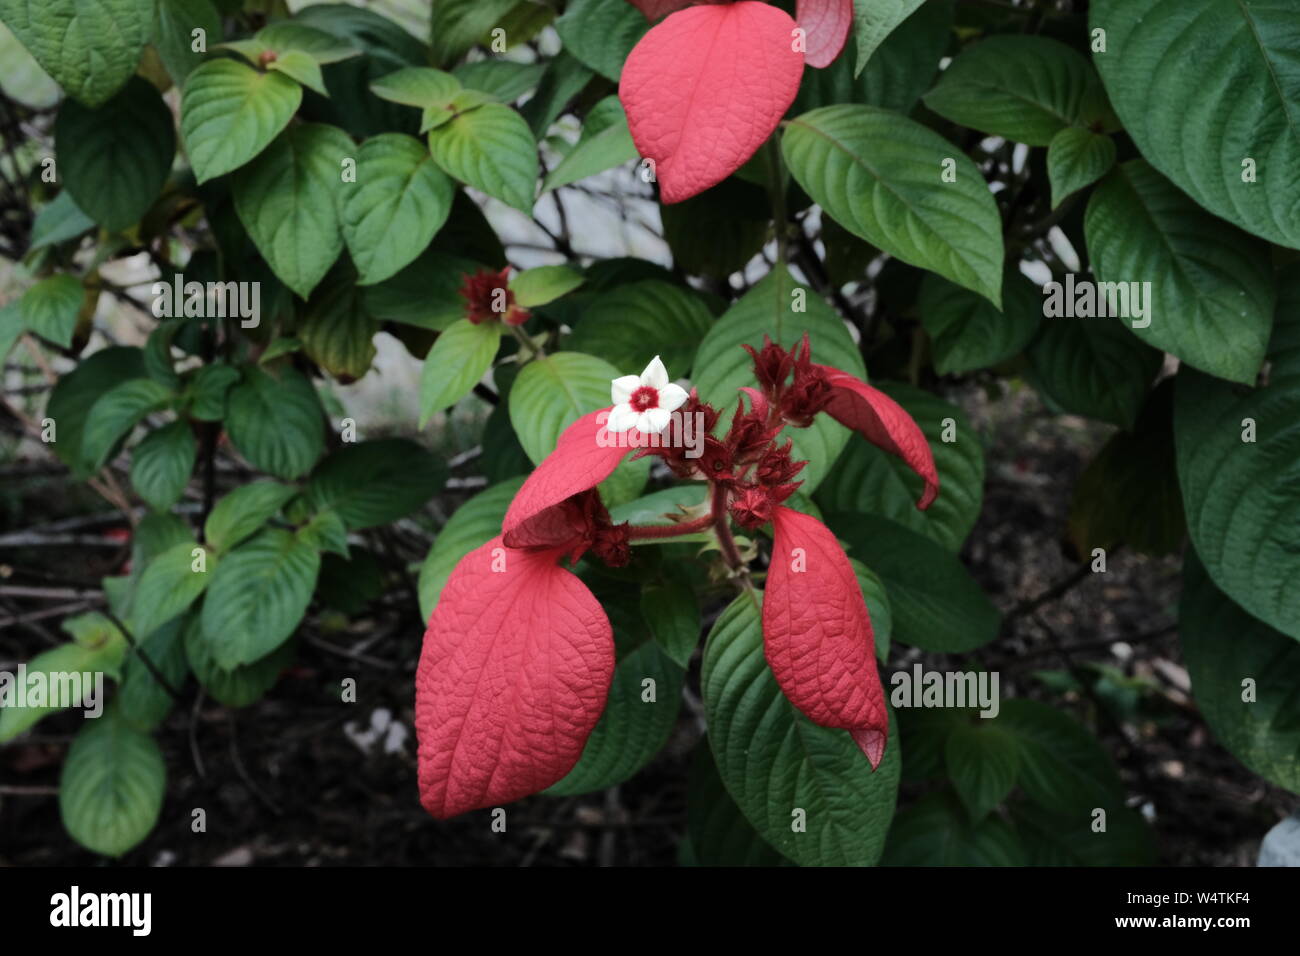 A white flower with red leaves among green leaves. Mussaenda. Stock Photo